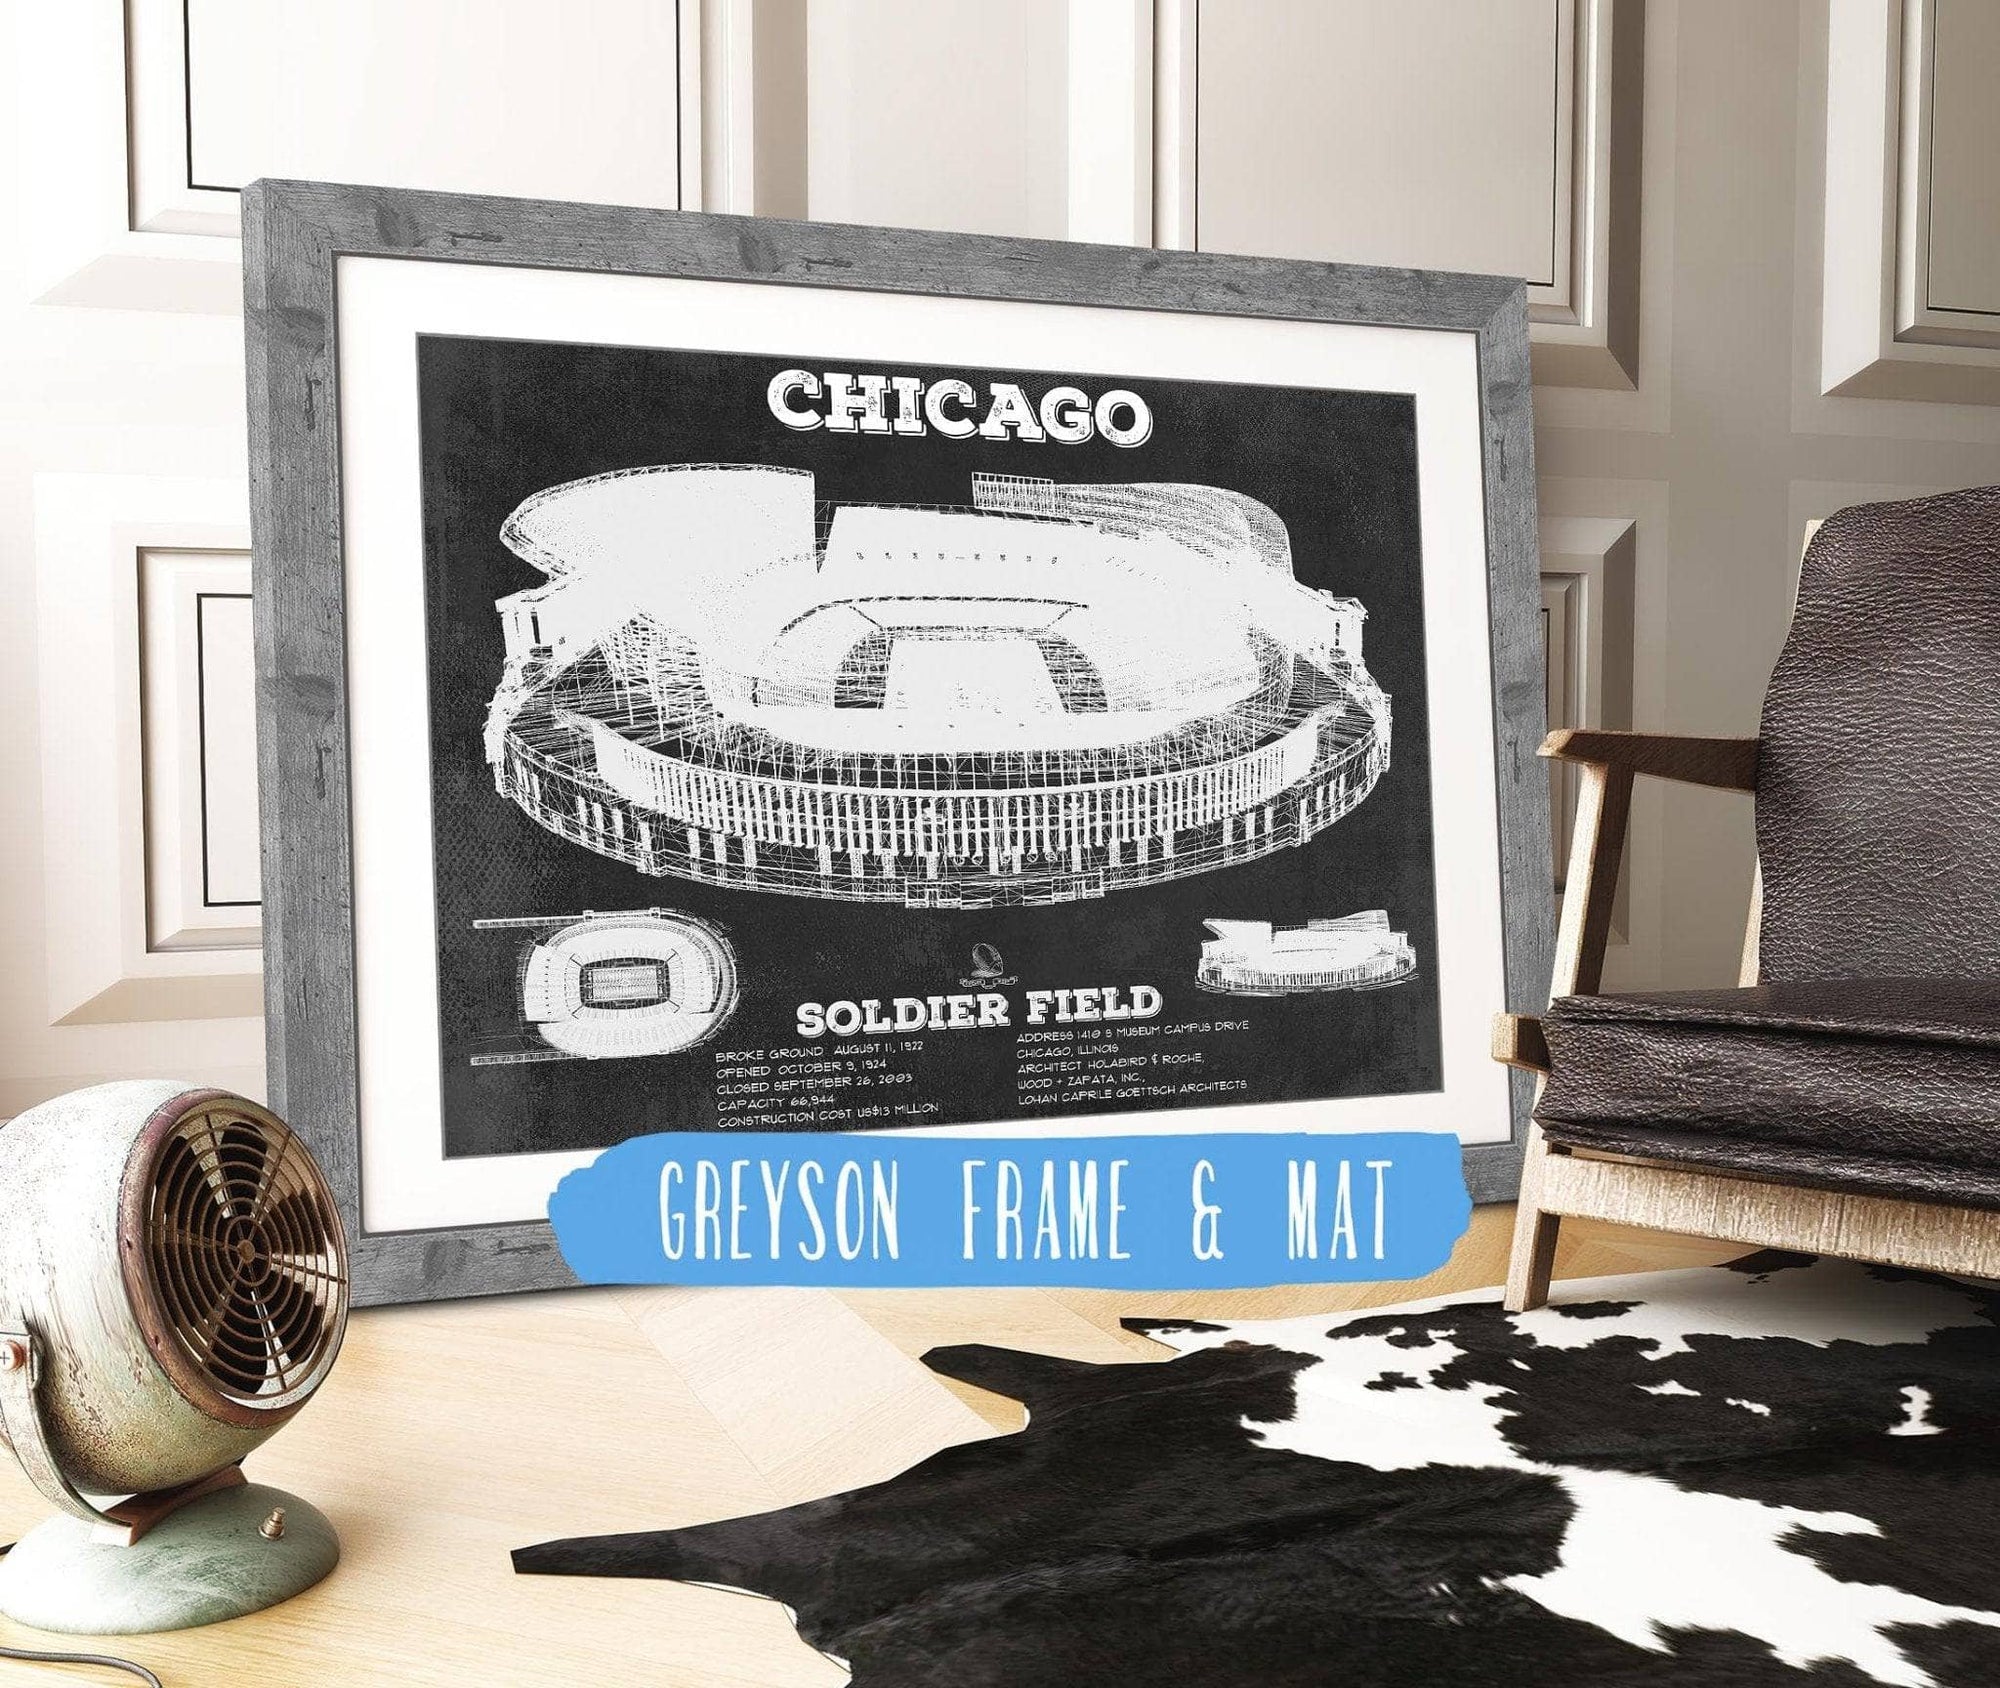 Cutler West Pro Football Collection 14" x 11" / Greyson Frame & Mat Chicago Bears Stadium Seating Chart - Soldier Field - Vintage Football Print 635629280_28880